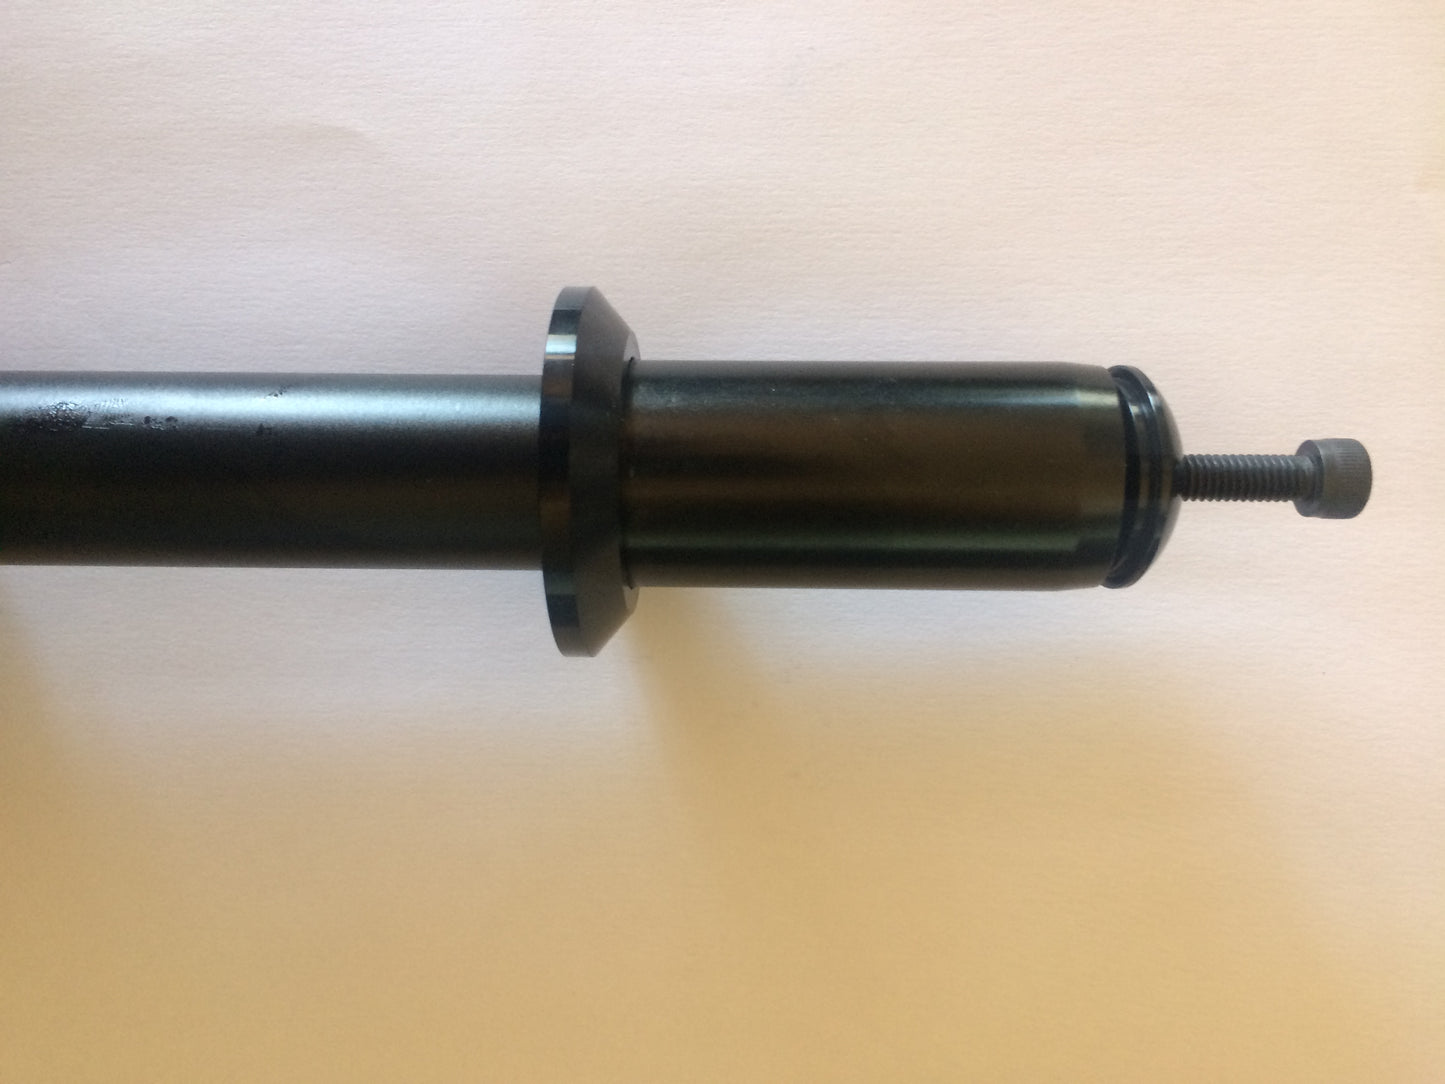 Compression sleeve and cap/screw using M6 size bolt